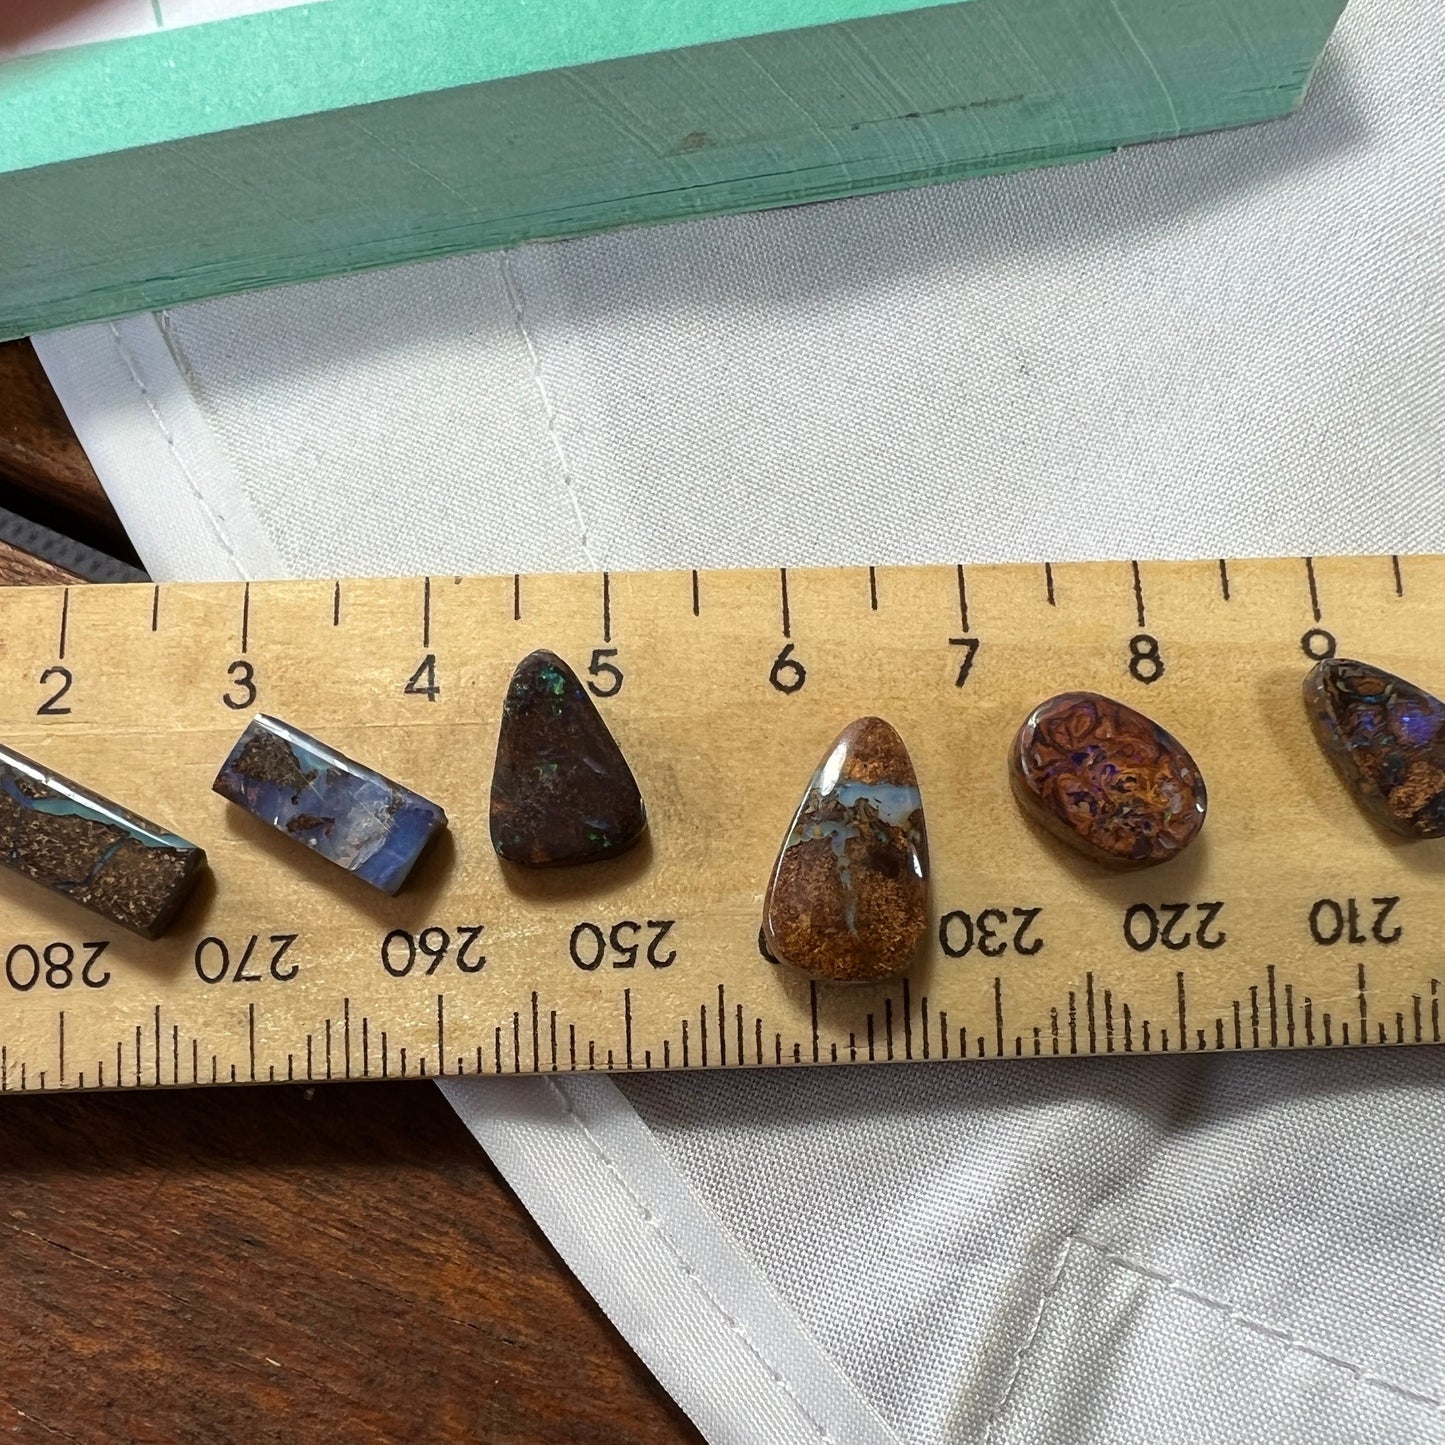 Nice group of 6 Winton boulder opals. Nice cut and polish. 